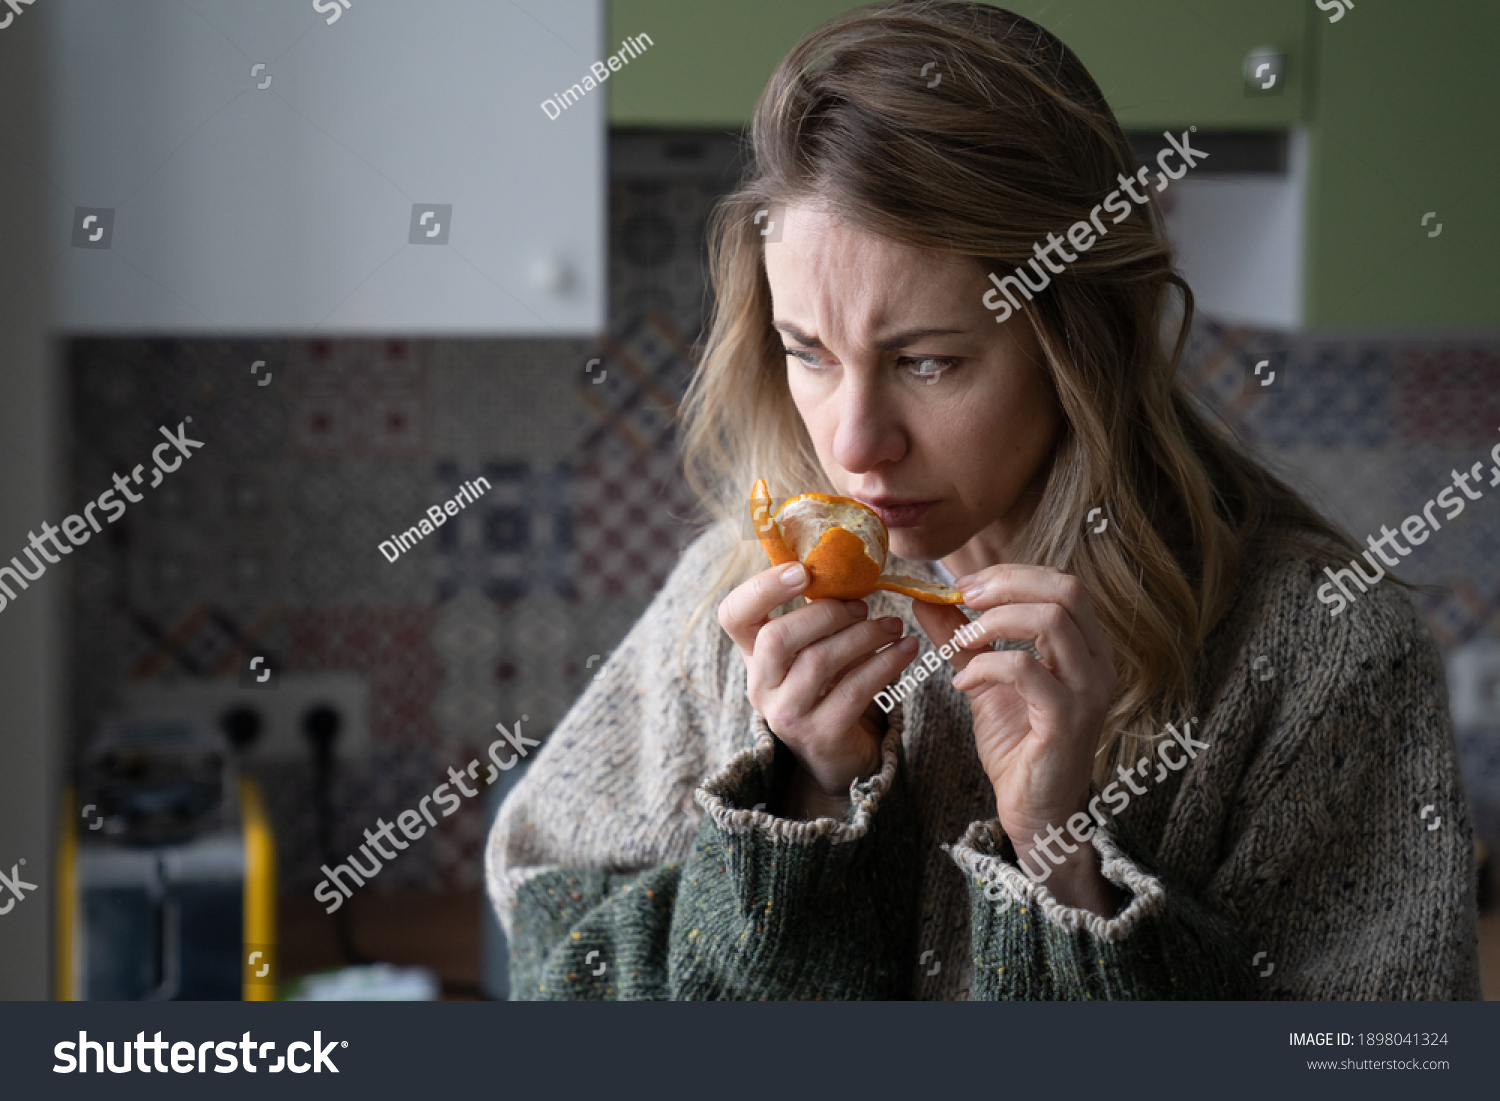 Sick woman trying to sense smell of fresh tangerine orange, has symptoms of Covid-19, corona virus infection - loss of smell and taste, standing at home. One of the main signs of the disease. #1898041324